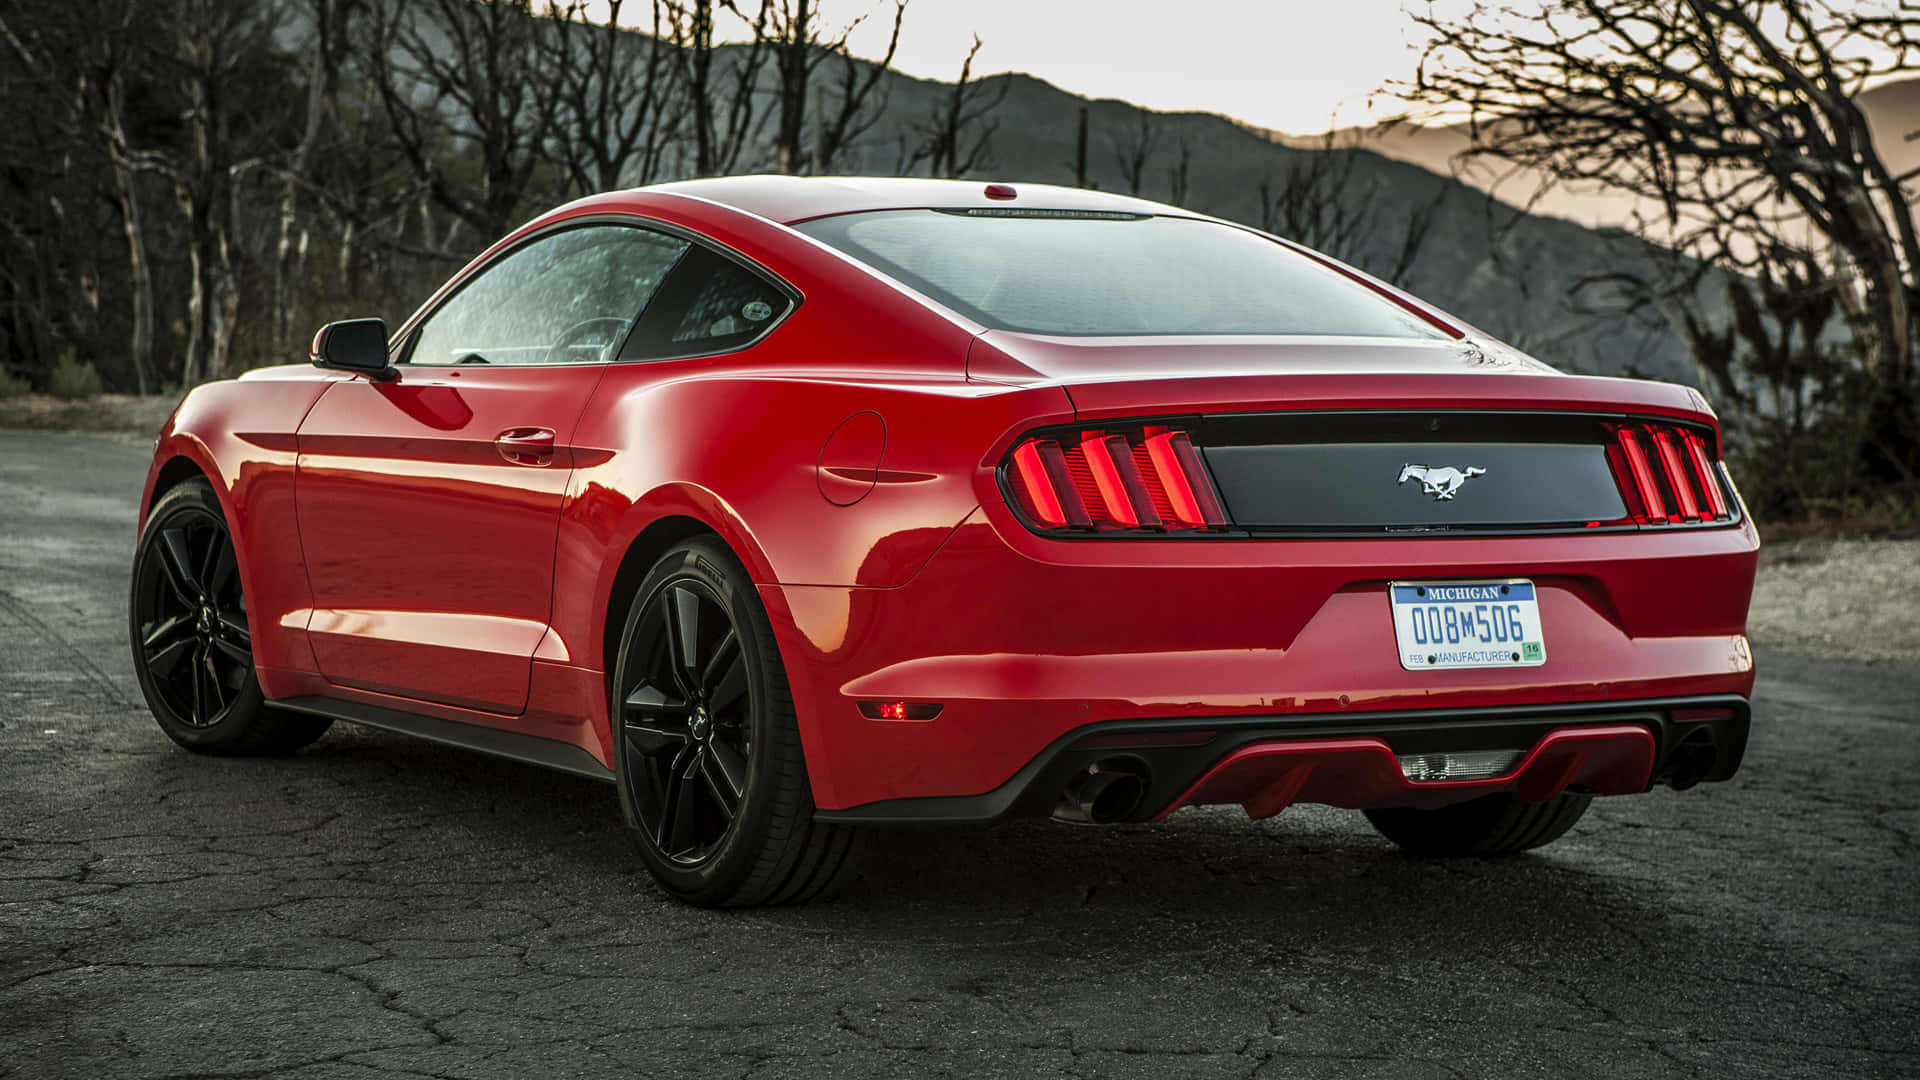 Stunning Ford Mustang Ecoboost in Action Wallpaper